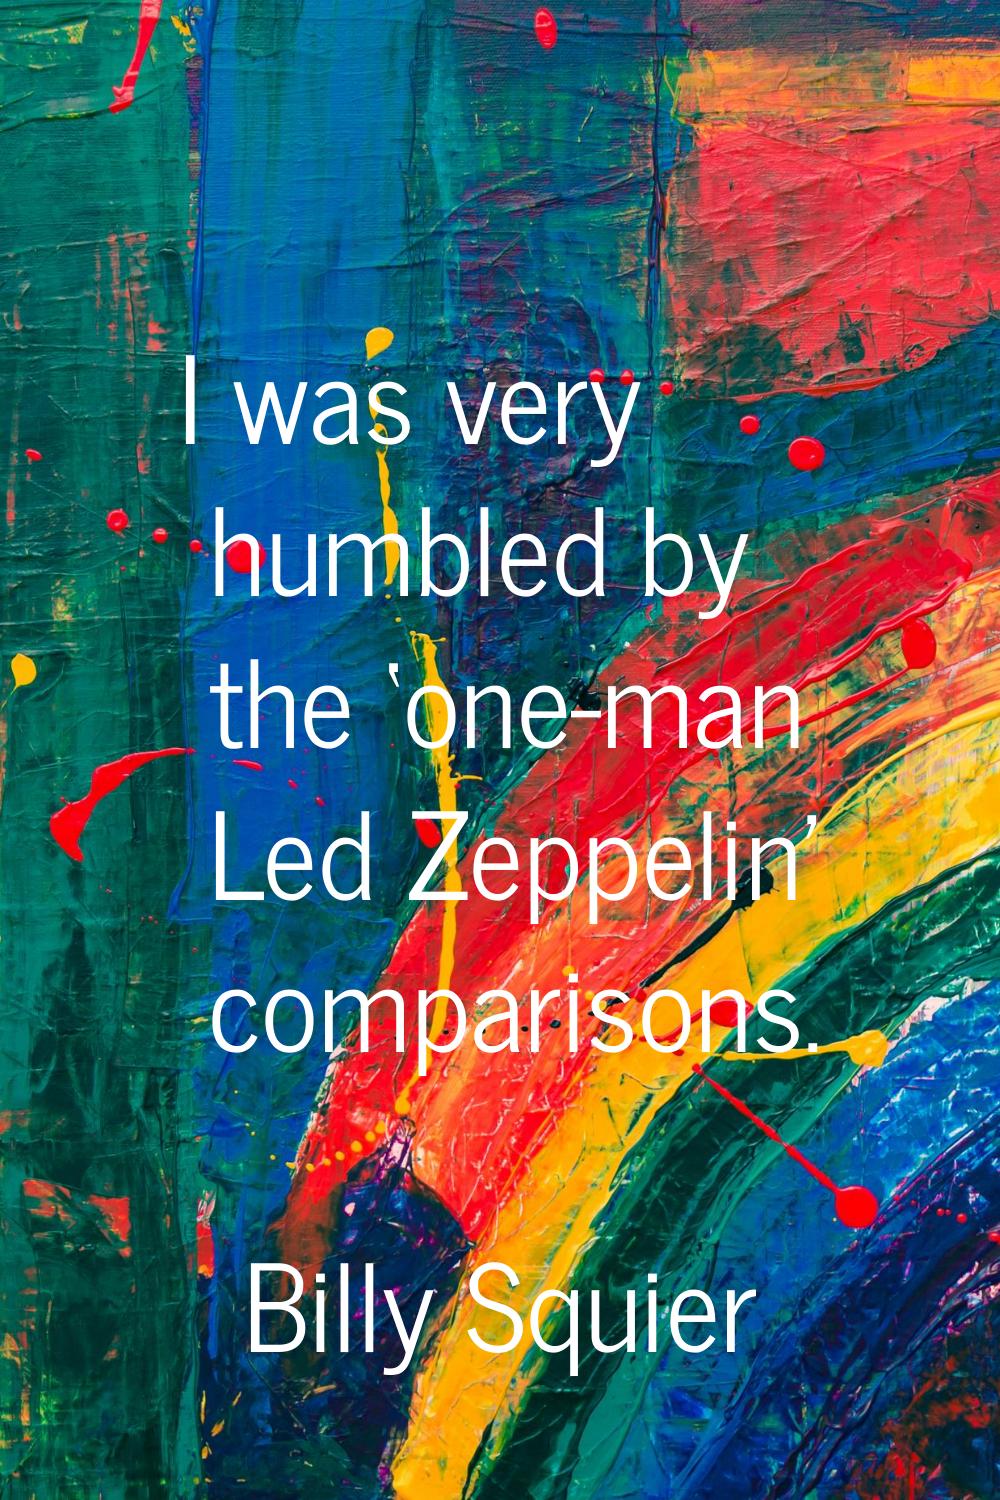 I was very humbled by the ‘one-man Led Zeppelin' comparisons.